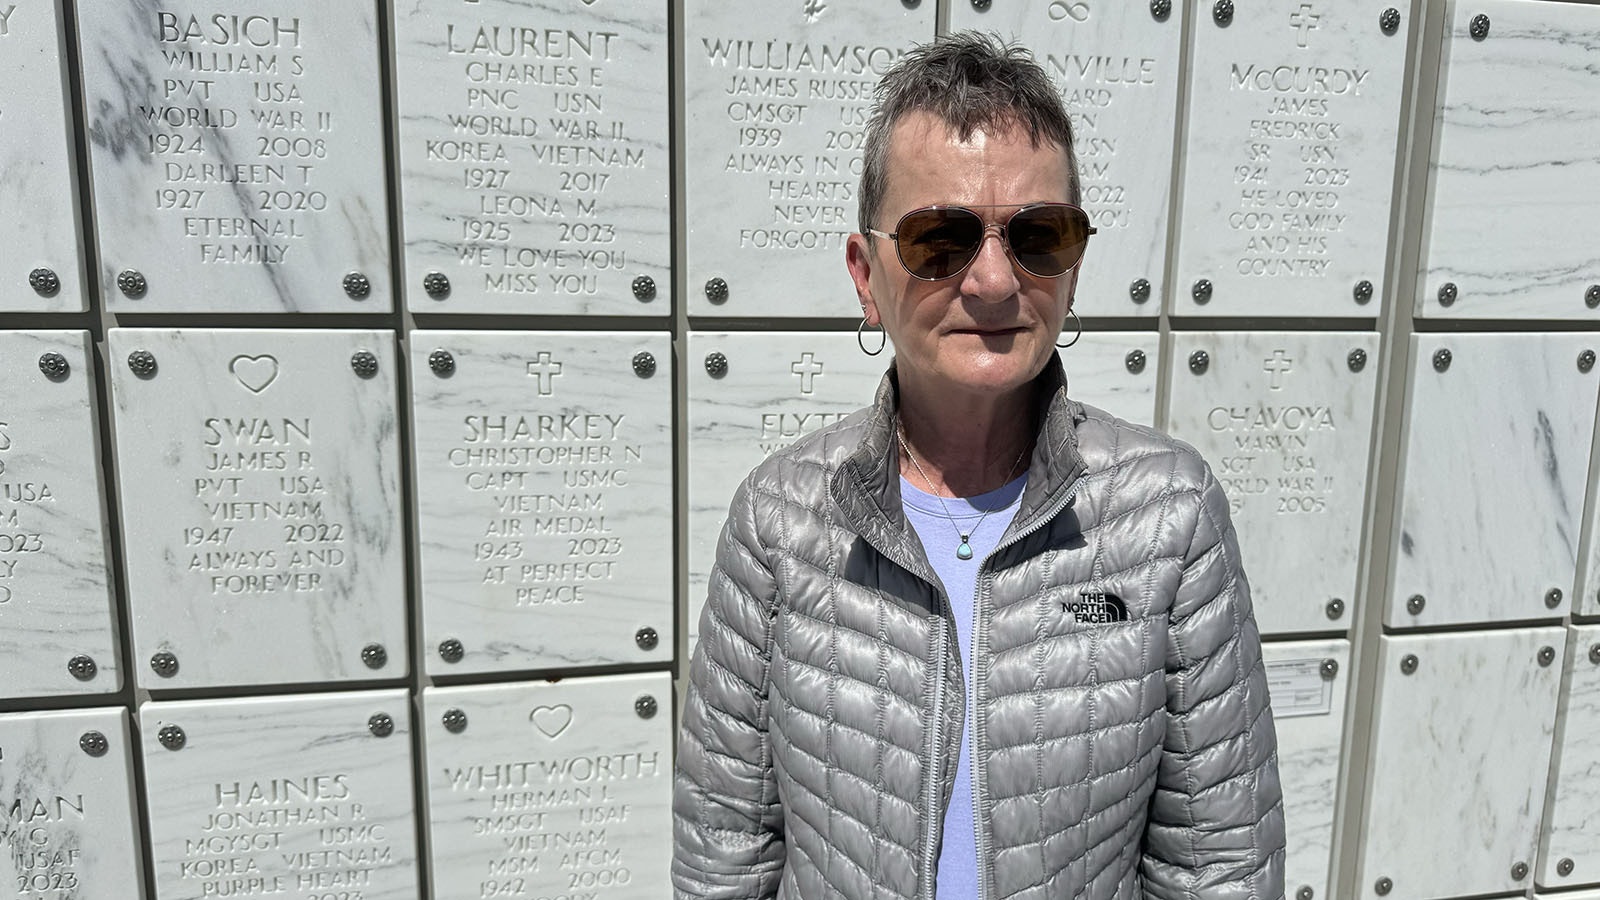 Jane Sharkey stopped by her husband’s marble nameplate on the columbarium to cry over her husband, “Crissy,” at the Cheyenne National Cemetery on Memorial Day.  He was a Marine who served in Vietnam, flew over 550 helicopter missions.